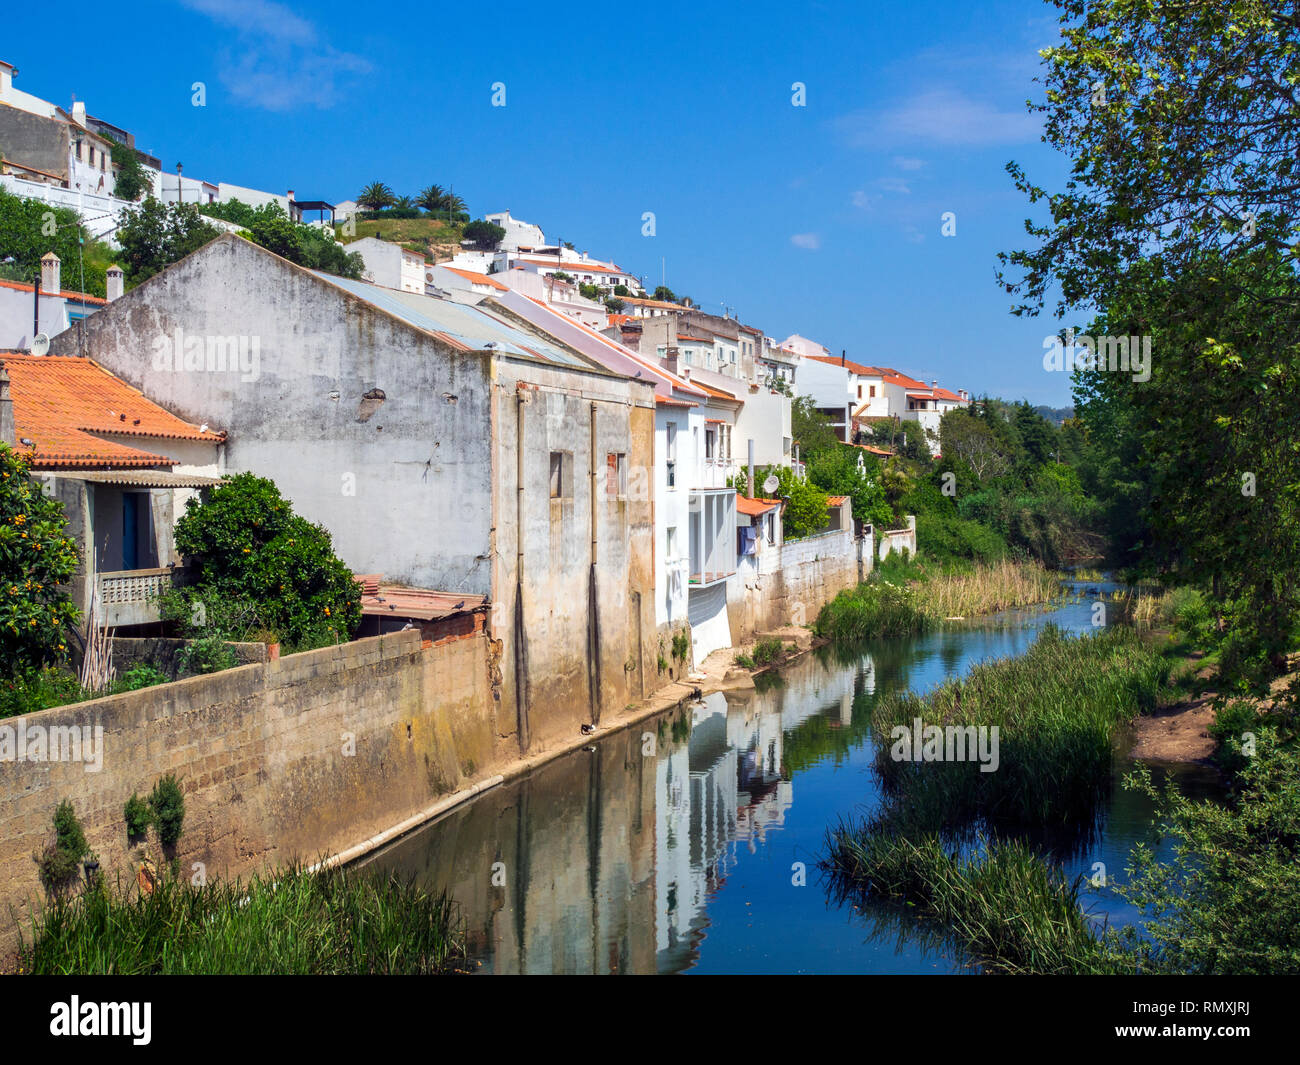 The river in Aljezur, a medieval town founded by the Moors in the 10th century, southern Portugal. Stock Photo